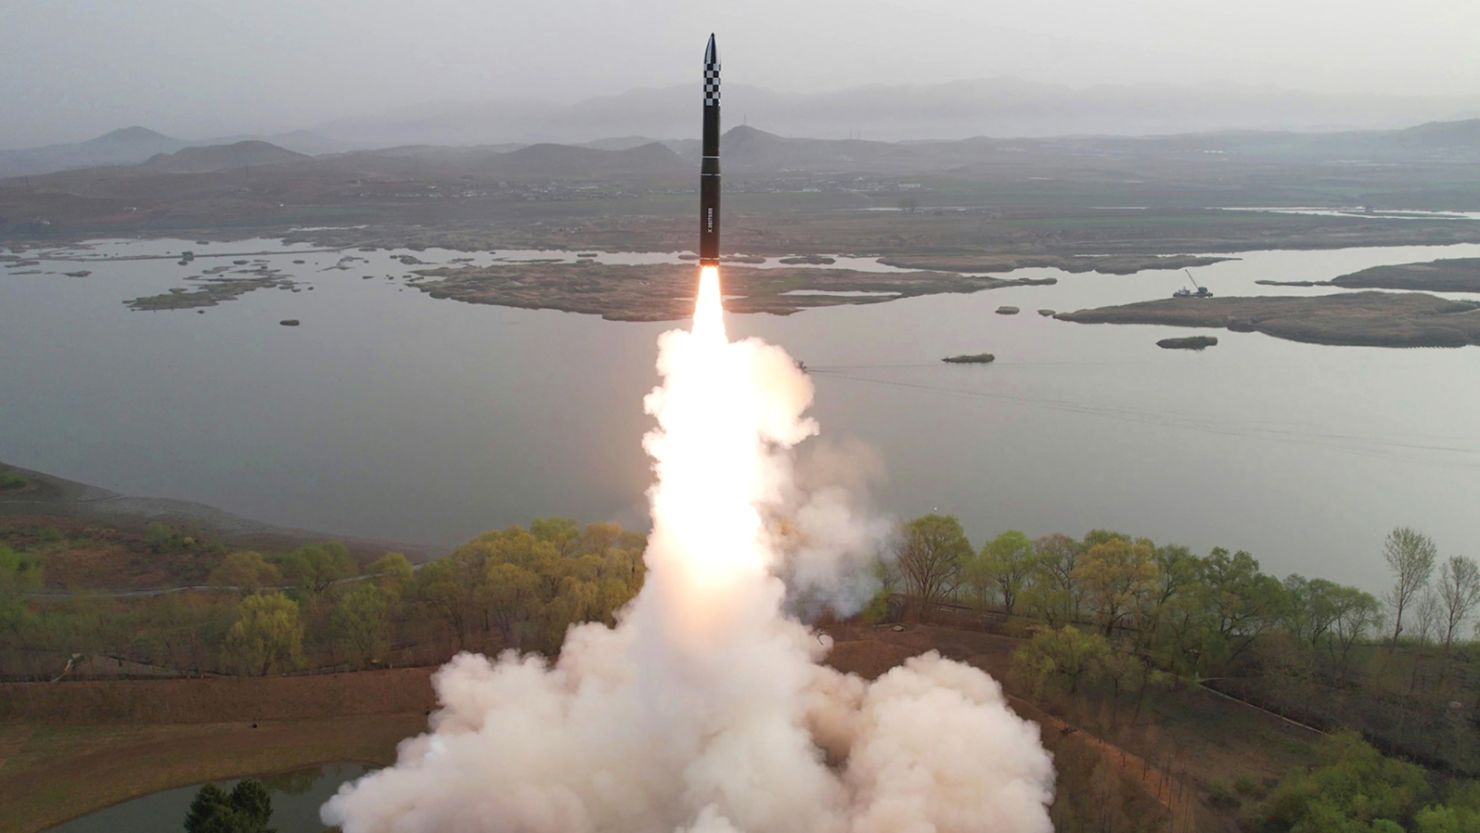 North Korea says it launched a new type of Hwasong-18 Intercontinental ballistic missile using solid fuel, on Thursday, according to state media KCNA.